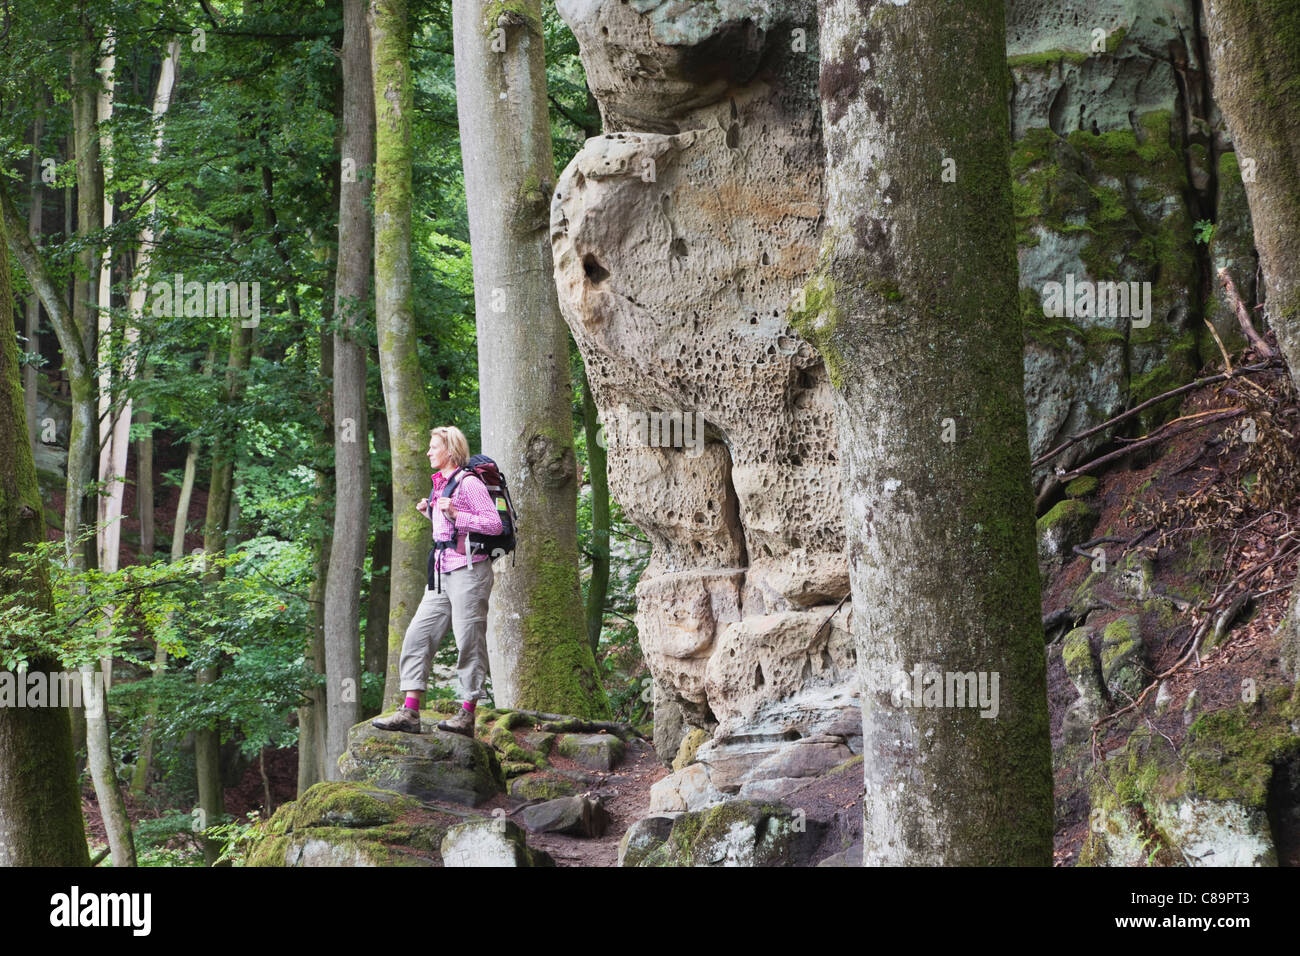 Germany Woman hiker standing near bunter rock formations at beech tree forest Stock Photo